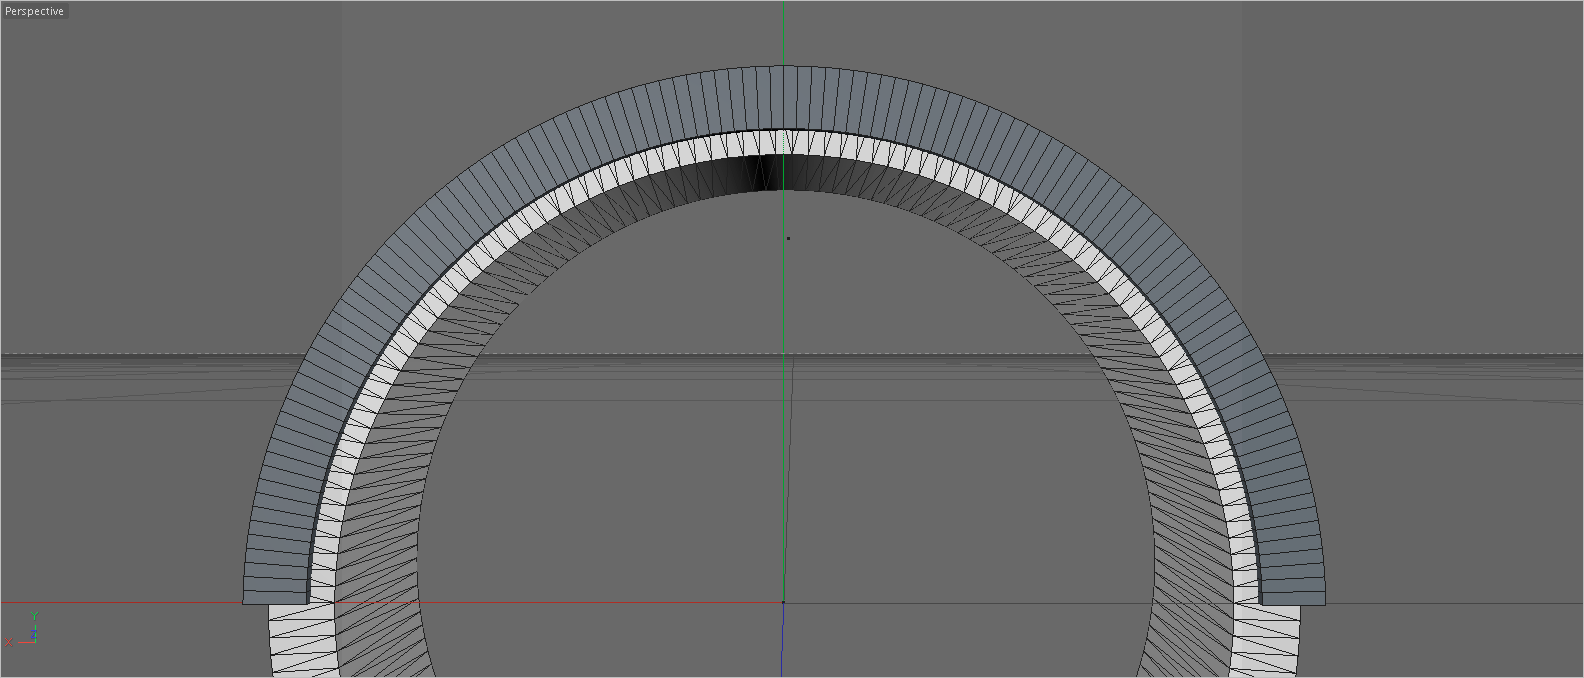 A screenshot from Cinema4D, showing a tube primitive laid over the duct ring model.